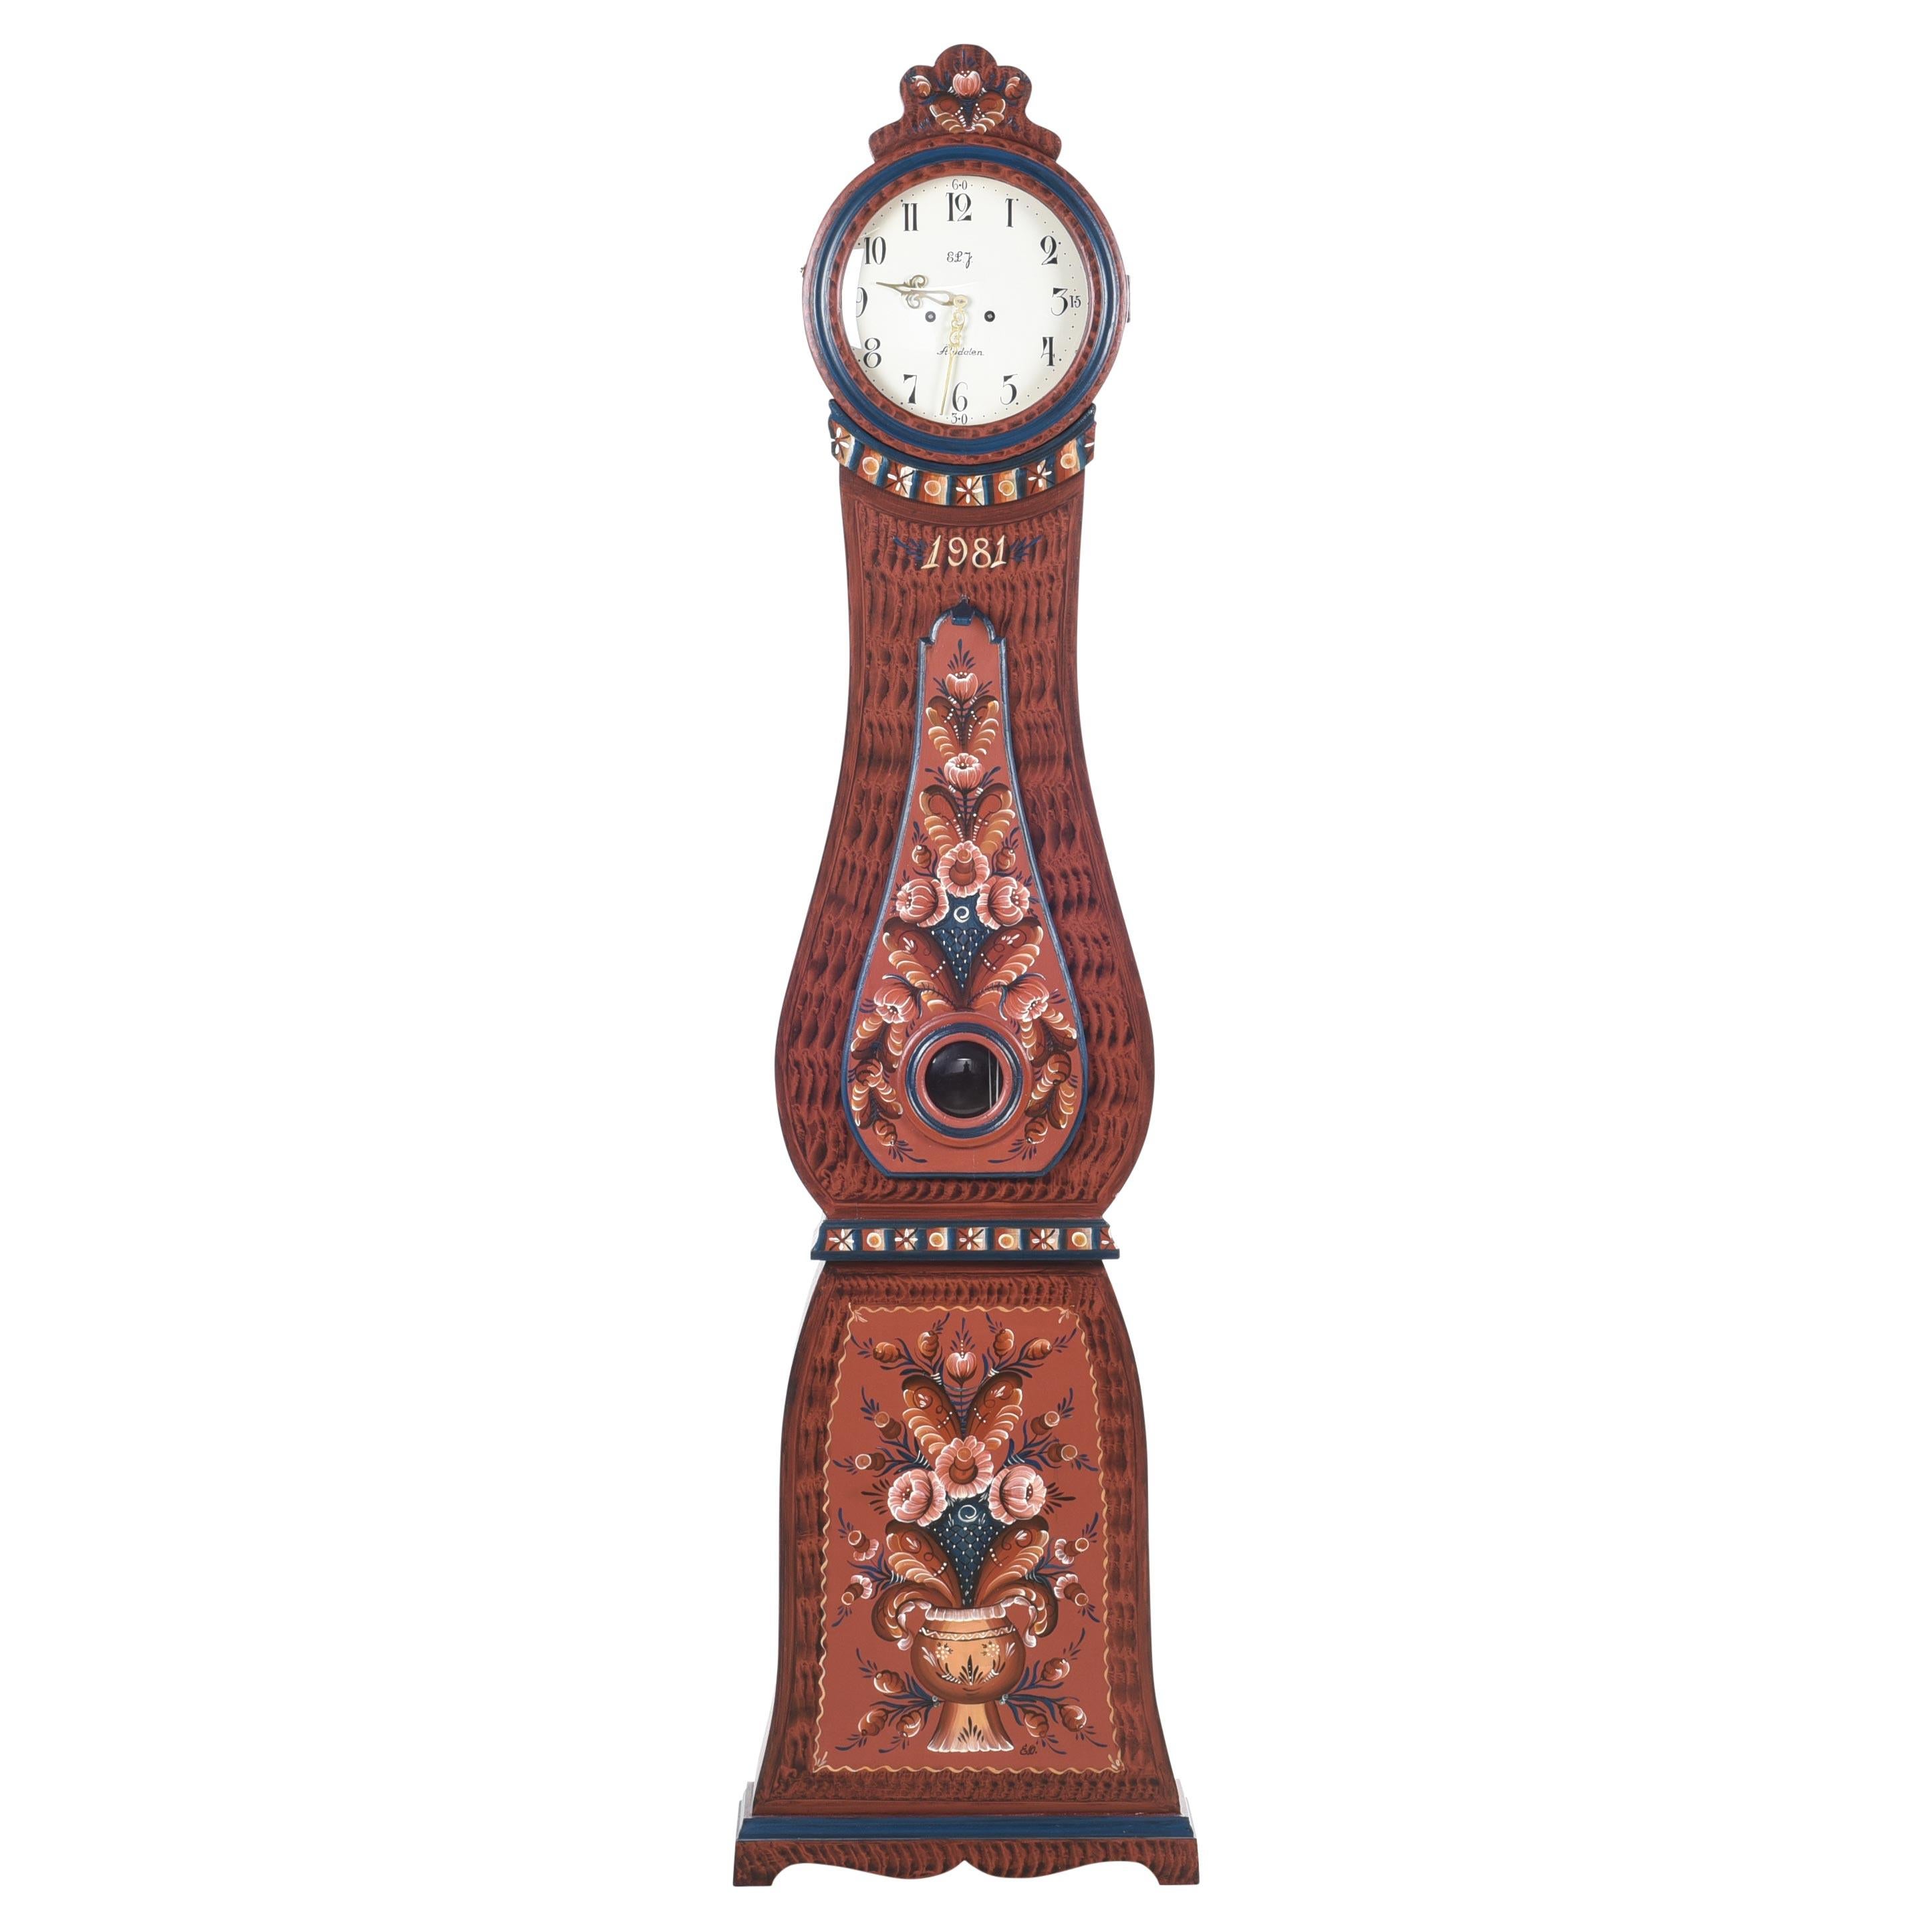 Swedish Mora clock dated 1981 in traditional Swedish folk patterns and flowers. Signed clock with makers initials 'ELJ' and village where the clock was made 'Aldden'. Working Longcase clock mechanism of pendulum and 2 weights and a bell chime on the